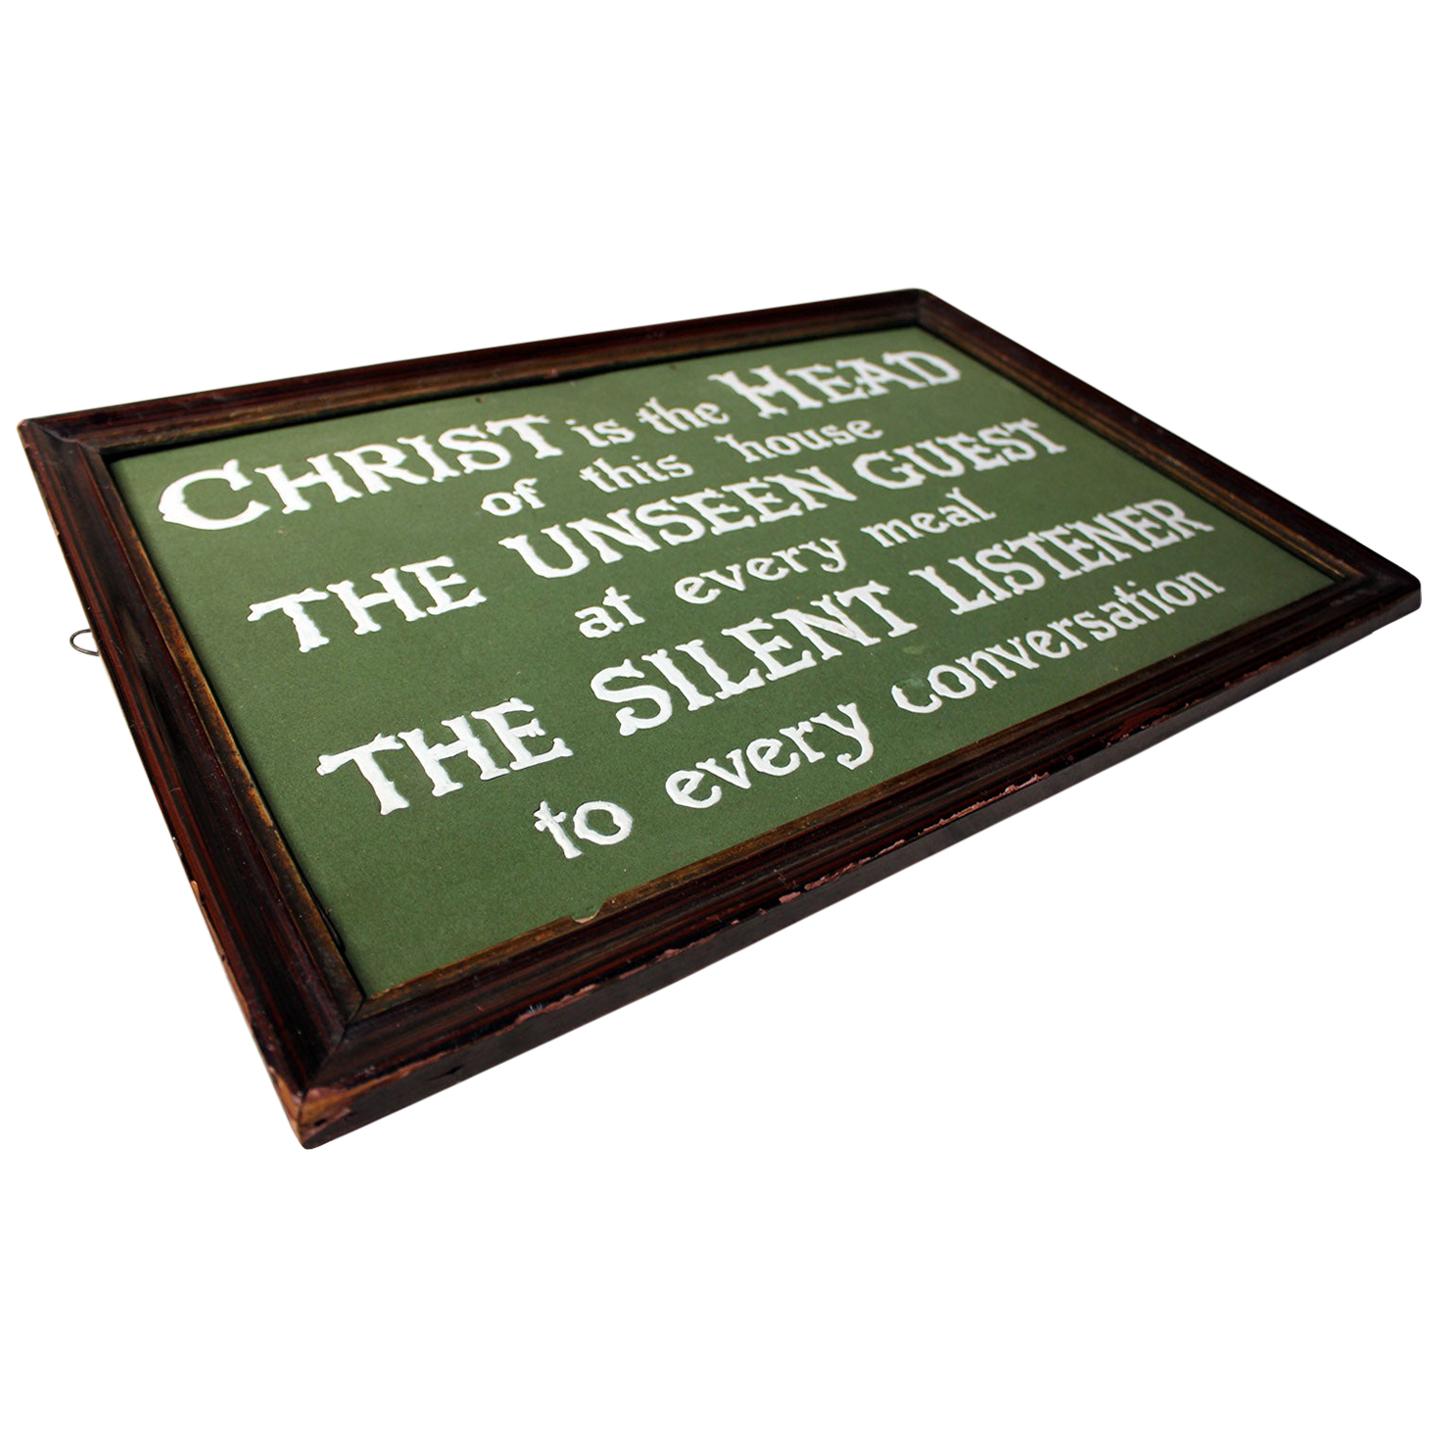 Religious Plaque; ‘Christ is the Head of this House’, circa 1915